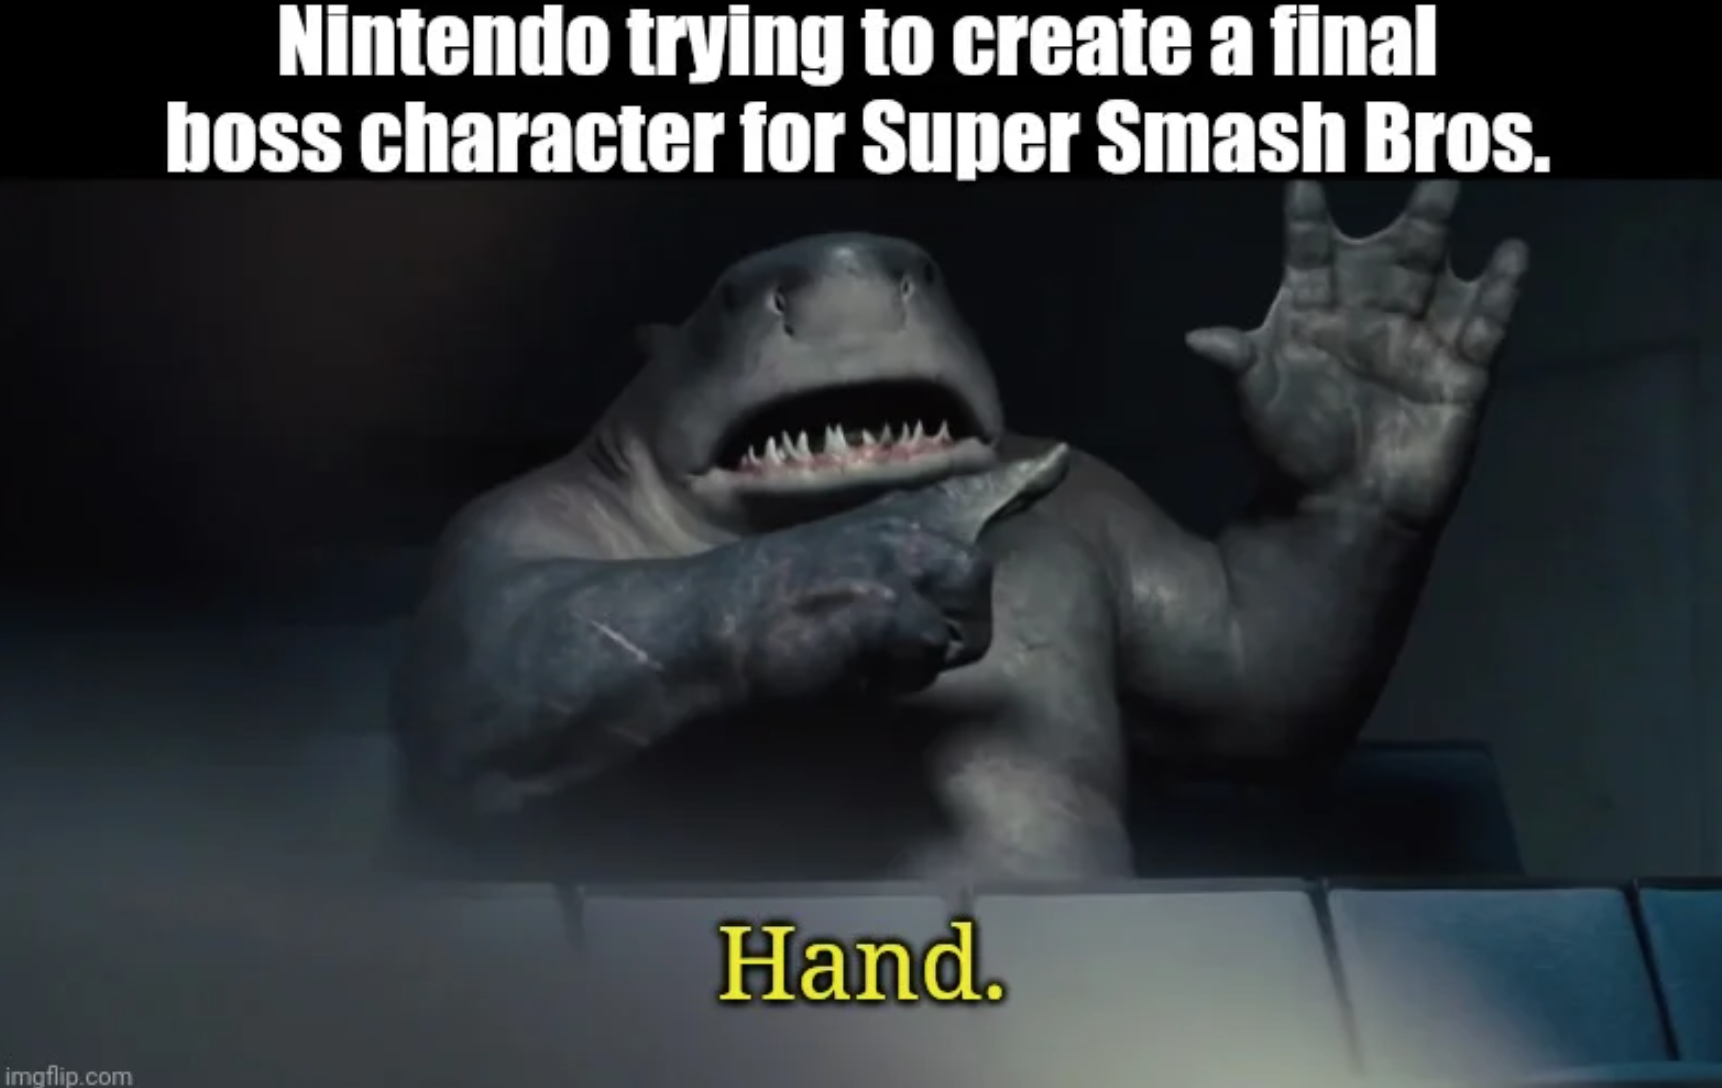 photo caption - Nintendo trying to create a final boss character for Super Smash Bros. M Hand. imgflip.com